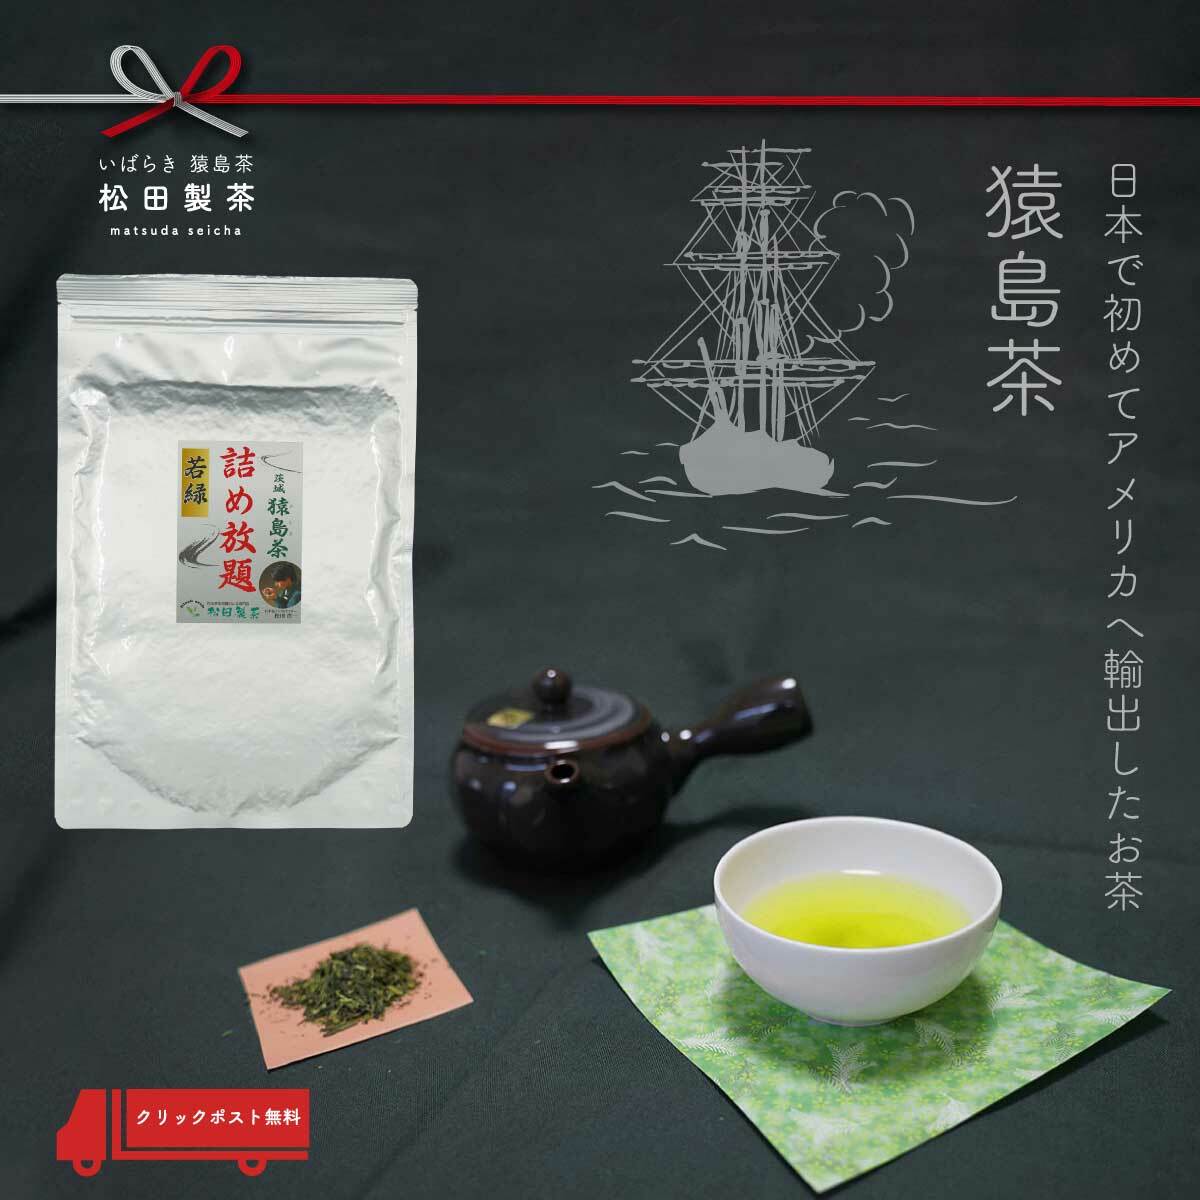 ylbgzlߕ ΁^310g Β Yn  錧 Ղ pp Y  ܒ waka midori {ł͂߂ăAJɗAo The first Japanese tea to be exported to the United States